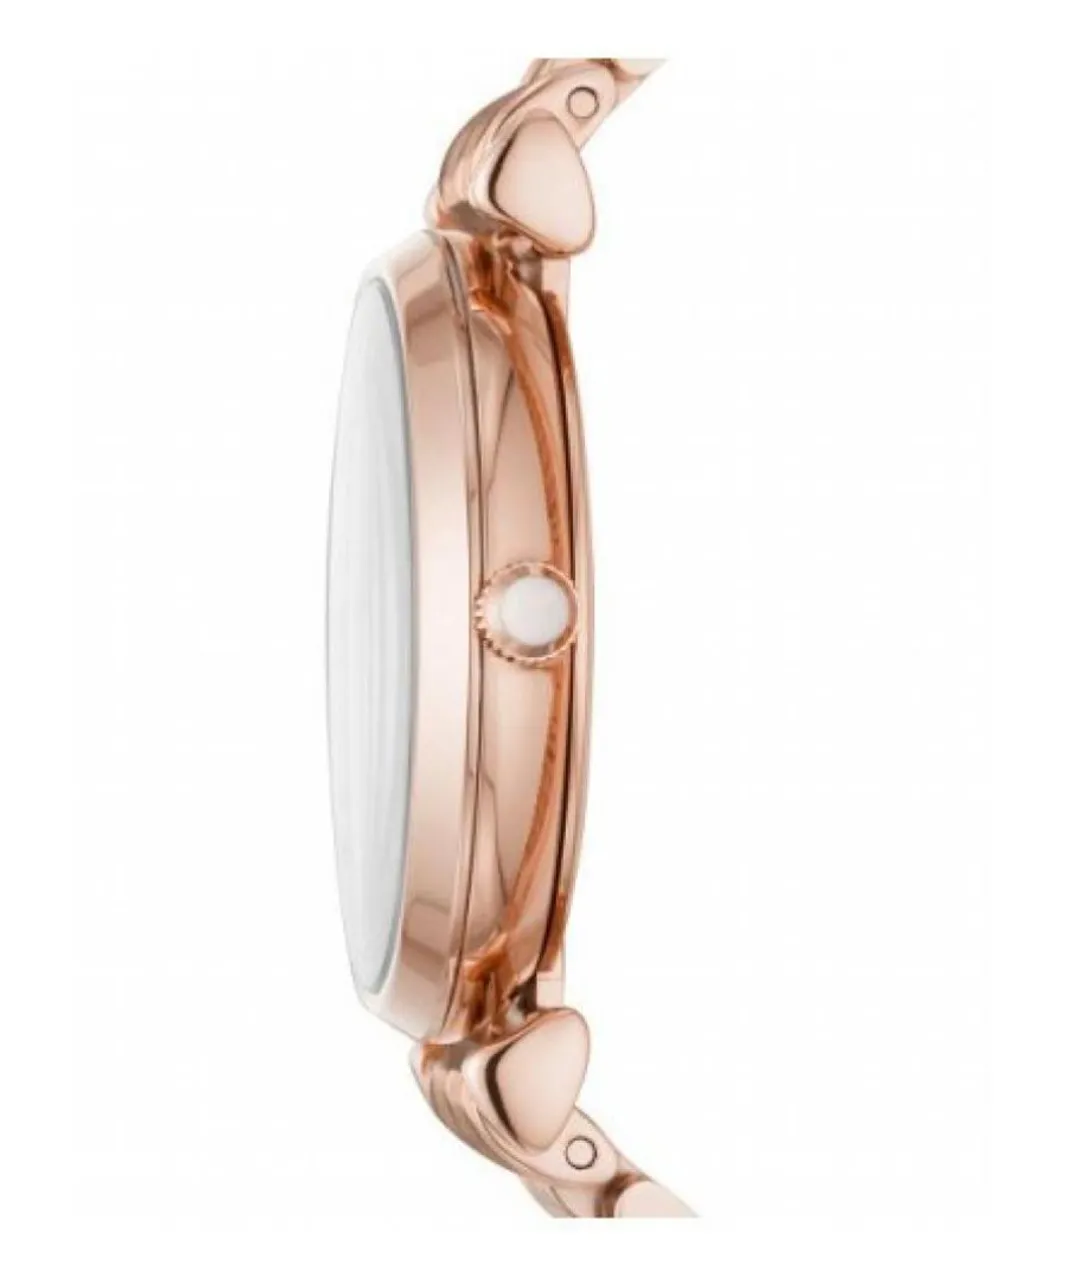 Emporio Armani Gianni T-bar WoMens Rose Gold Watch AR11244 Stainless Steel (archived) - One Size